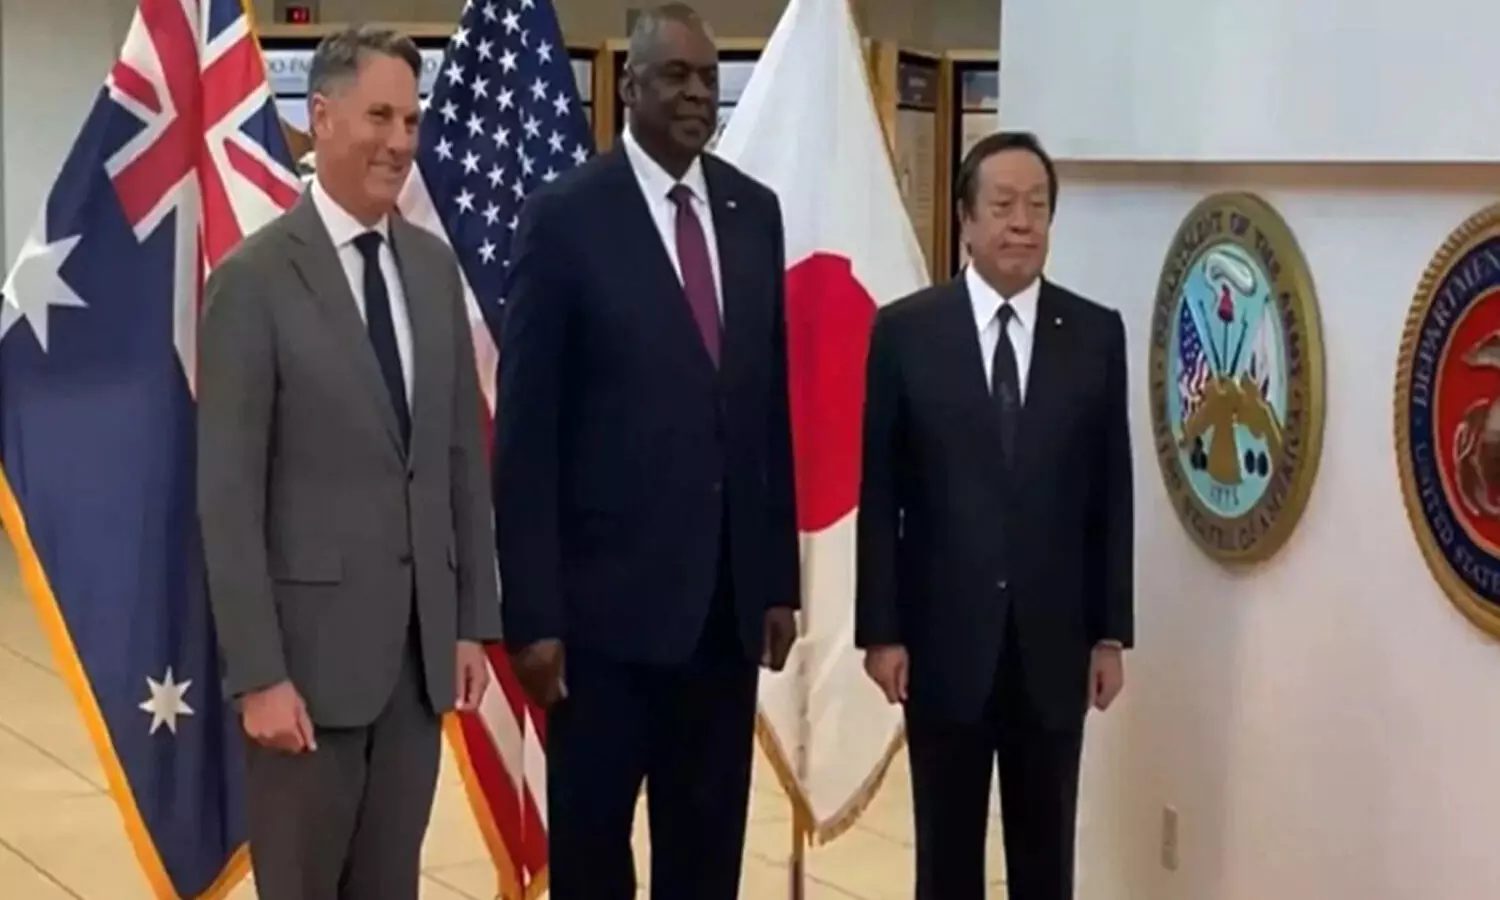 US, Australia and Japan vow to work together against China